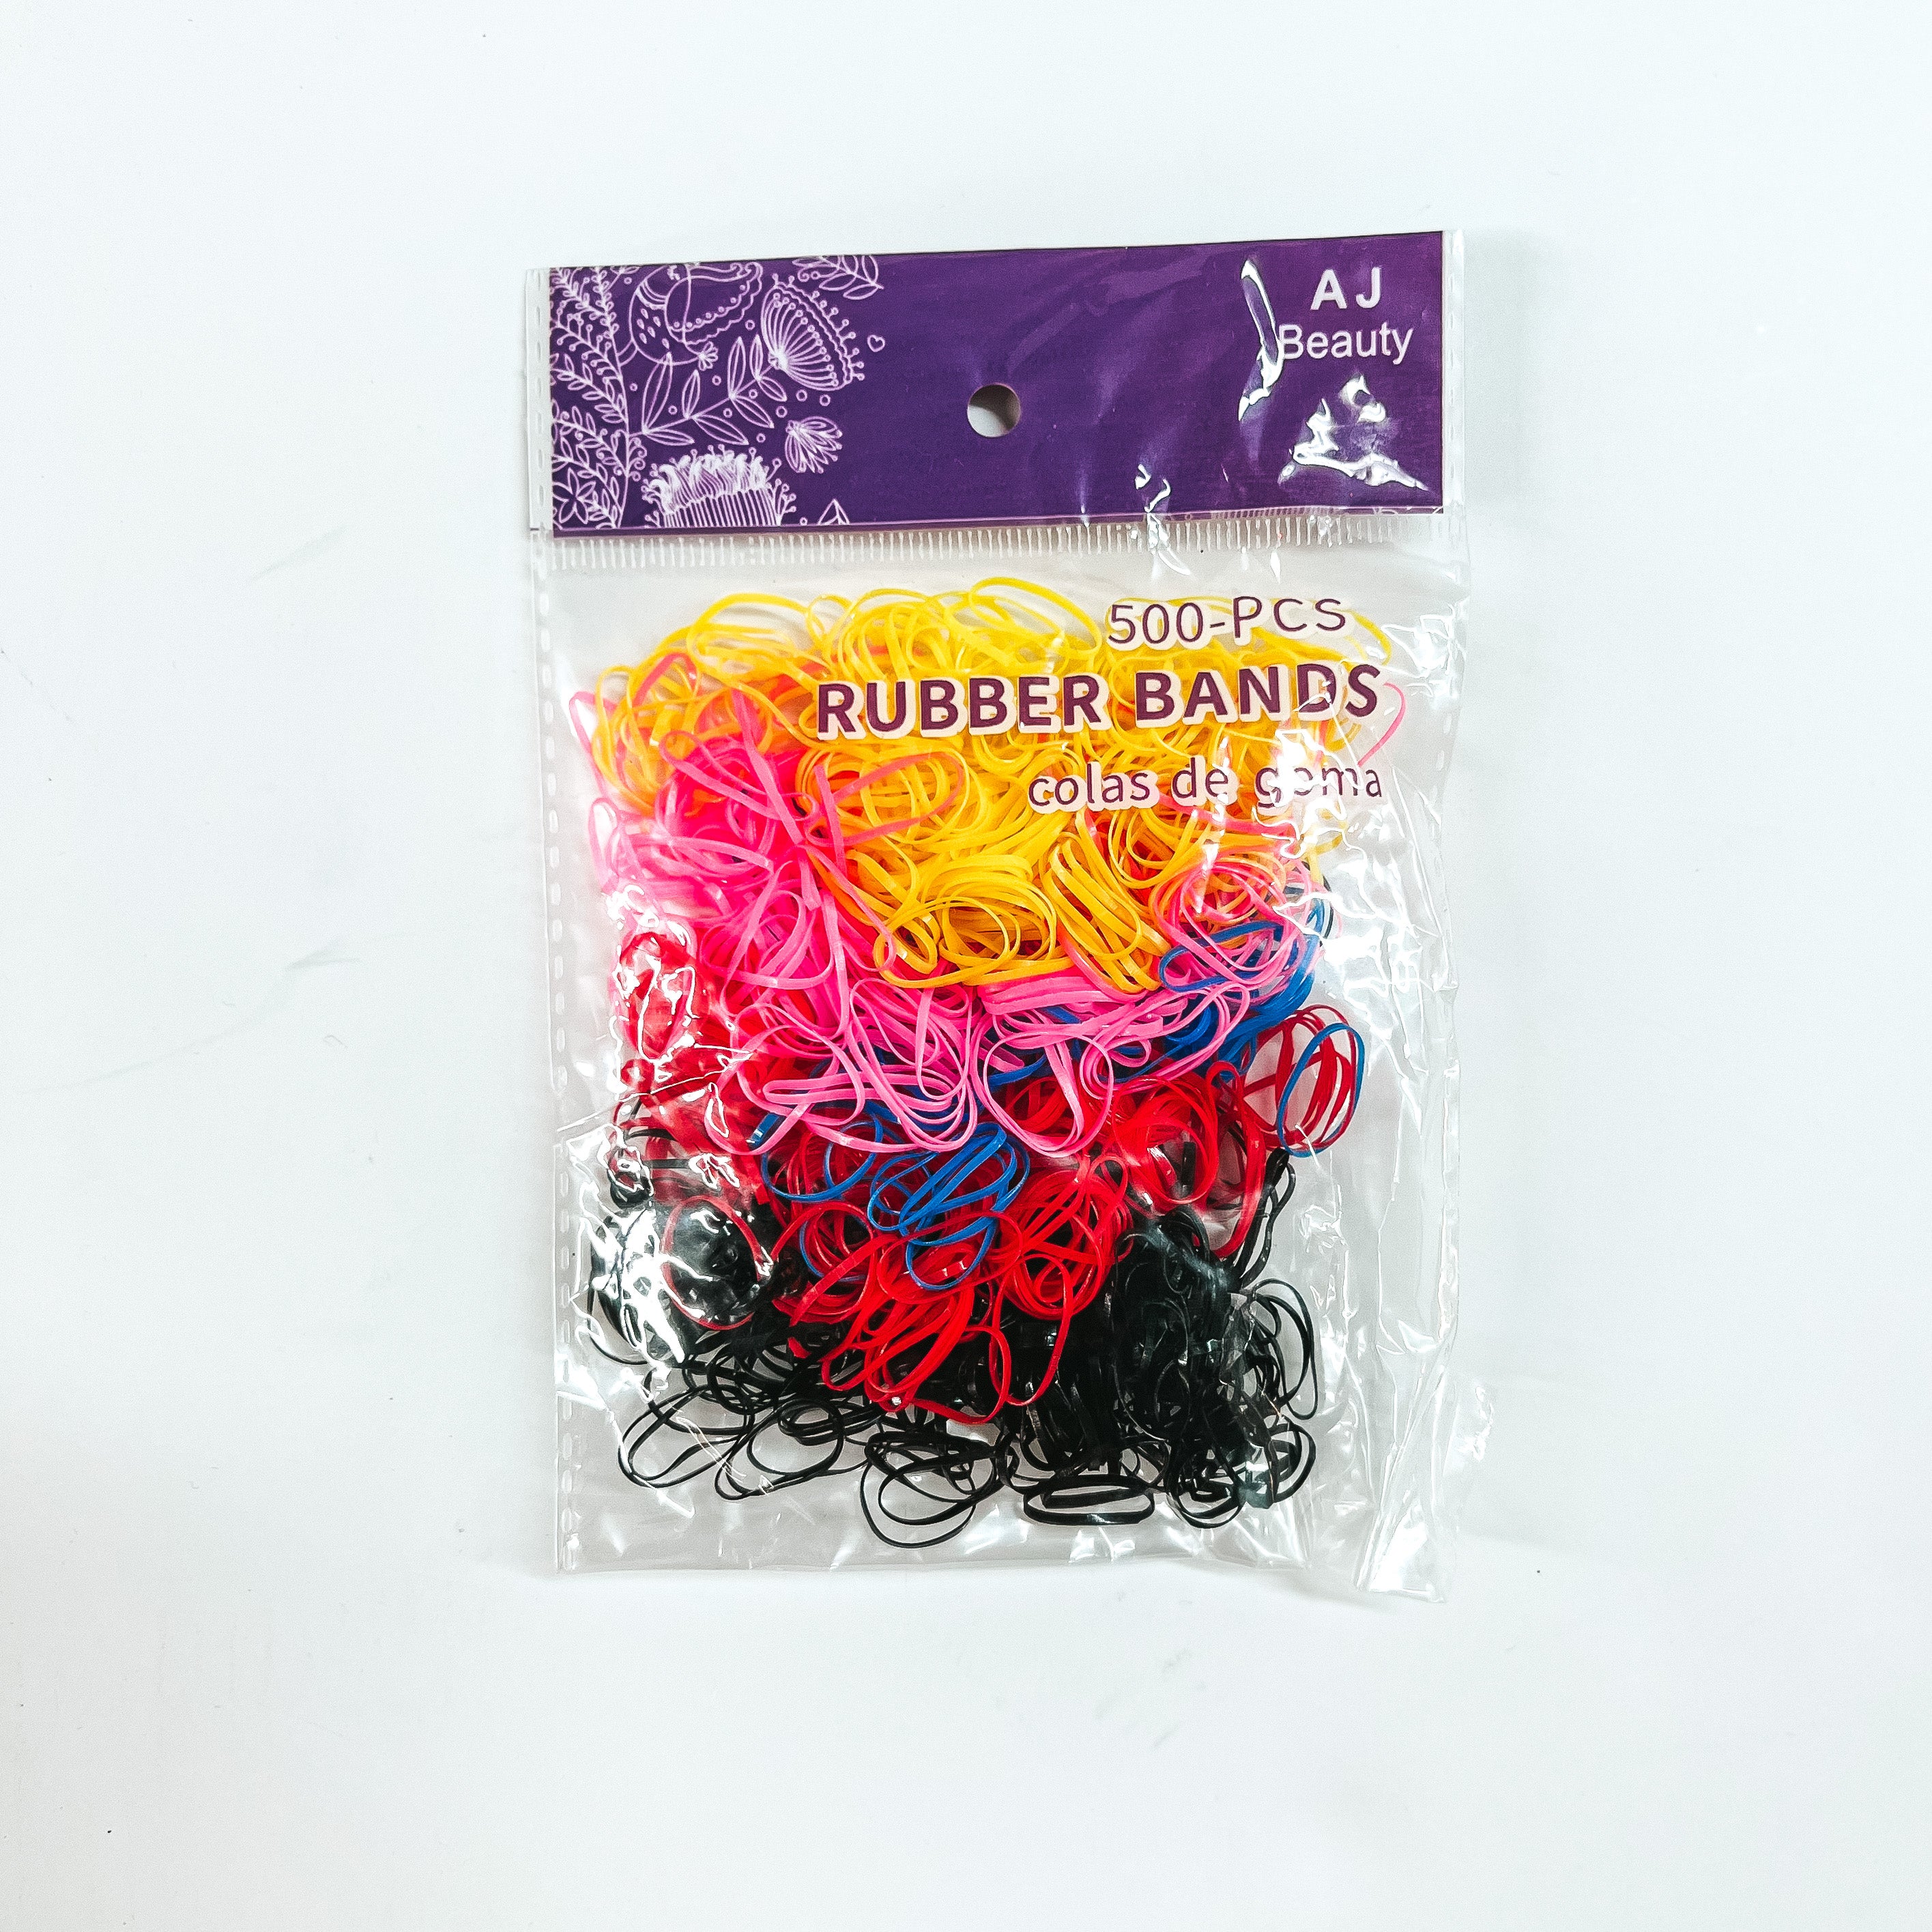 This is a pack of 500 small rubber bands in different colors such as yellow, pink, blue, red, and black. This clear and purple pack is taken on a white background,